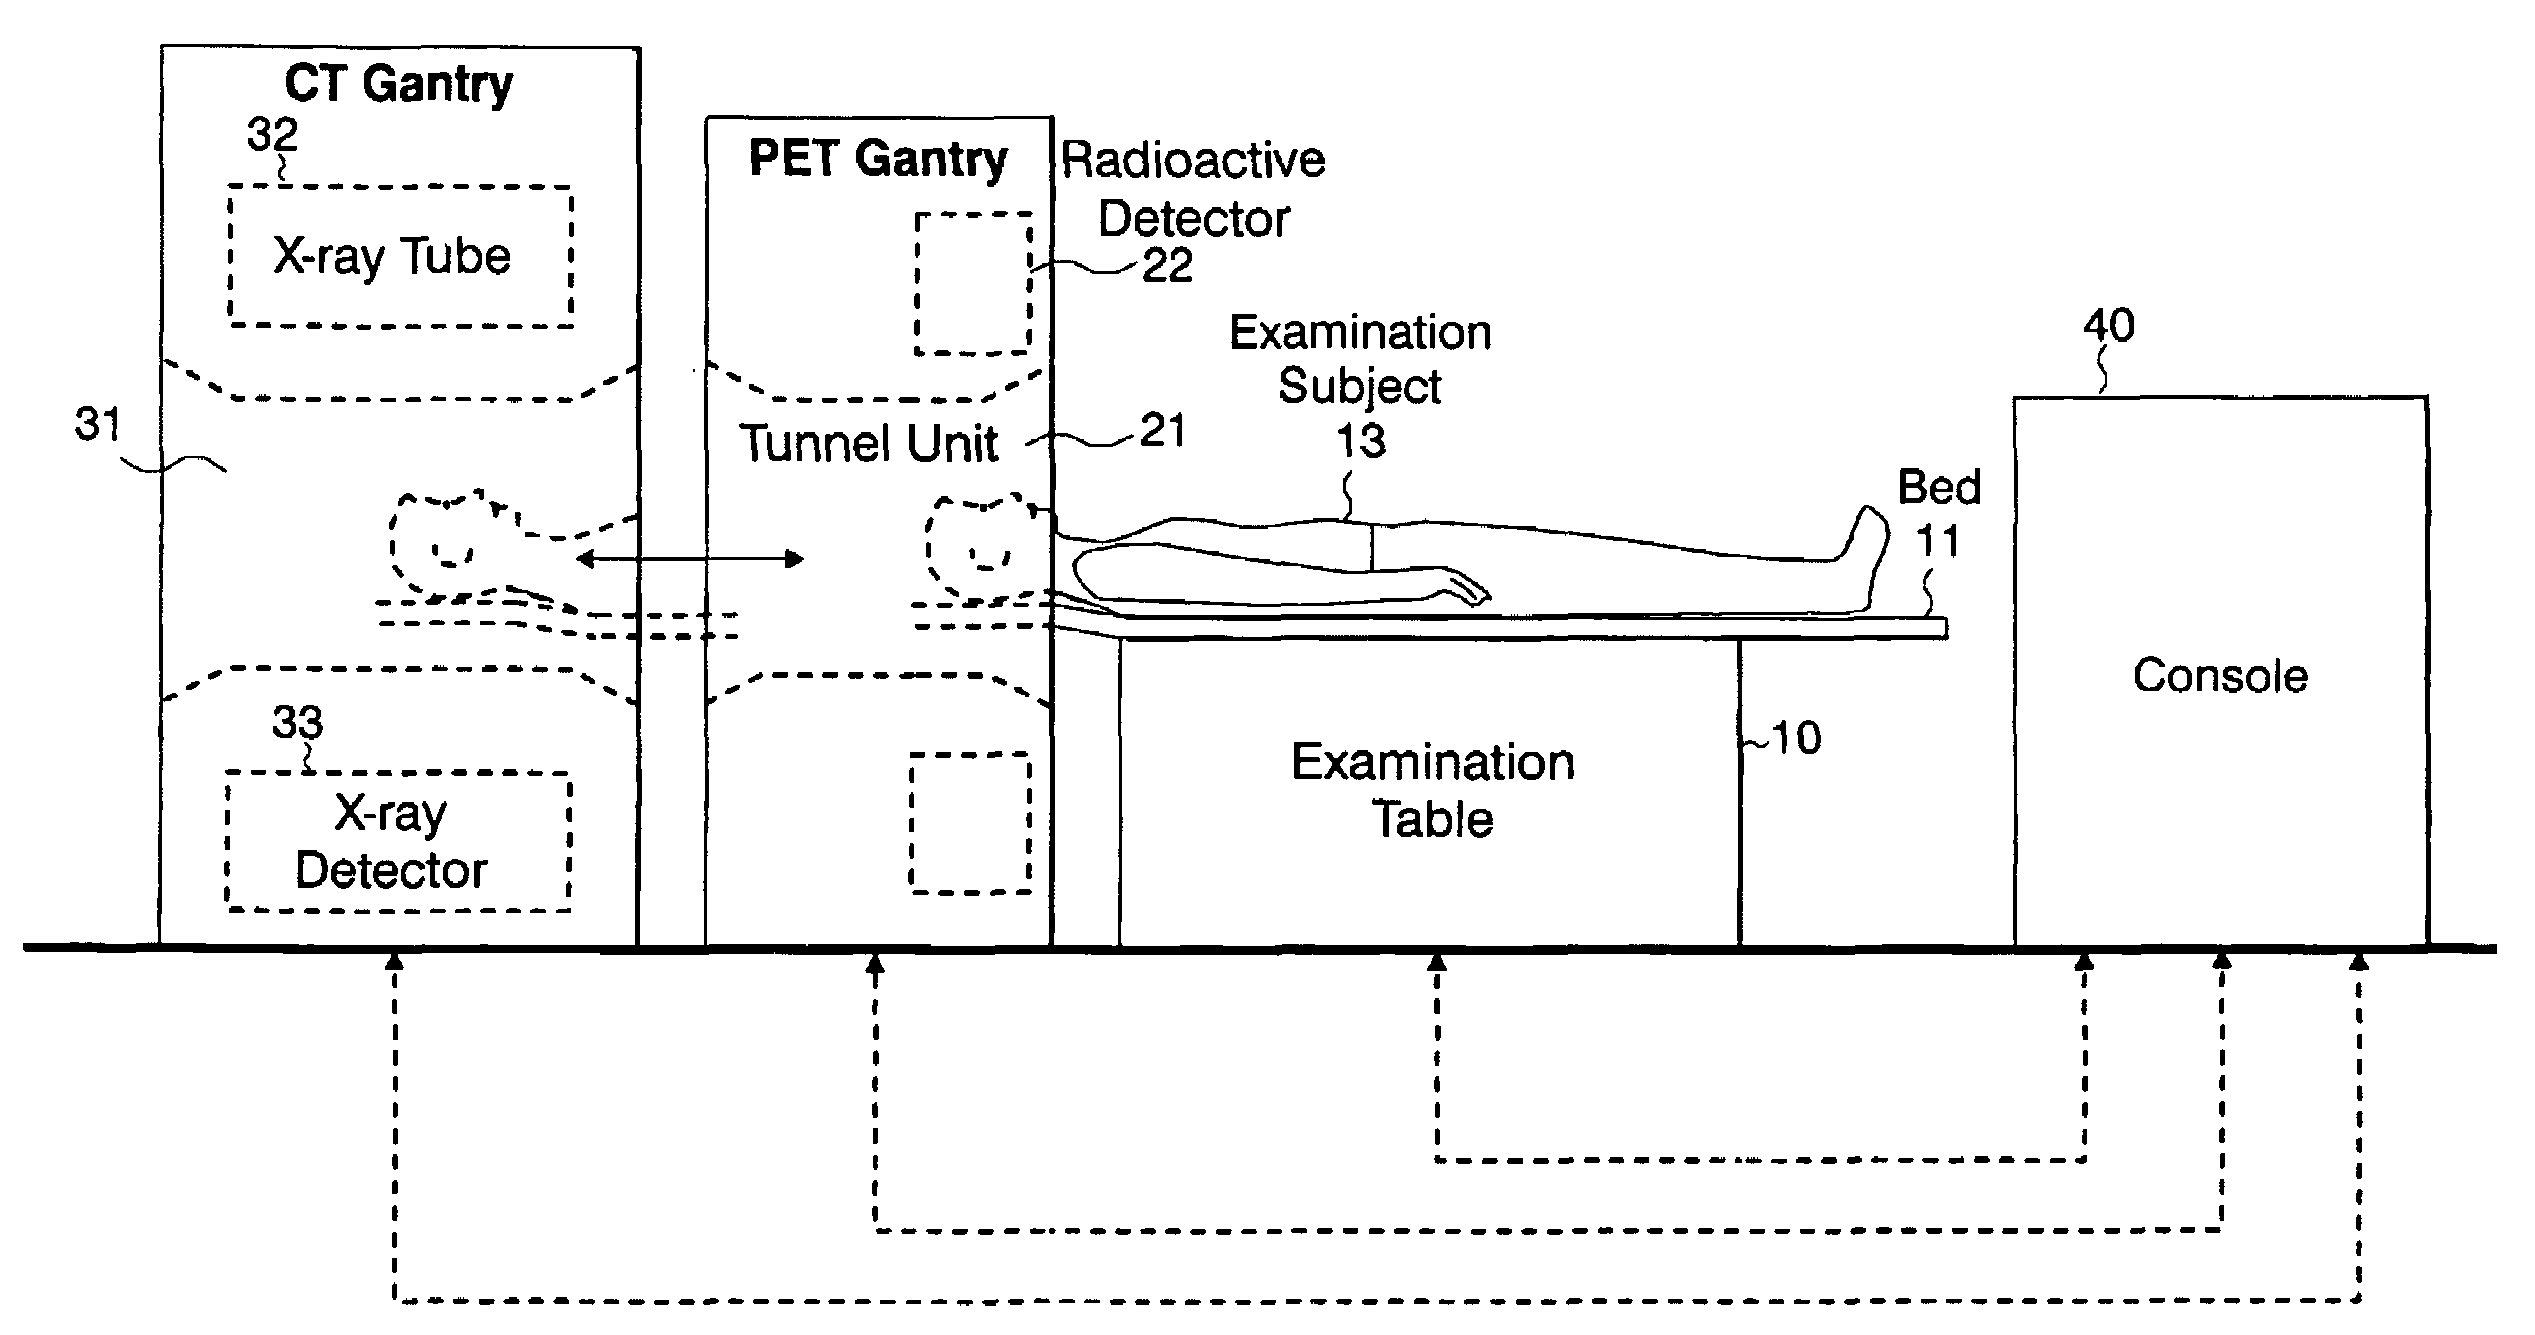 Diagnostic imaging device for medical use